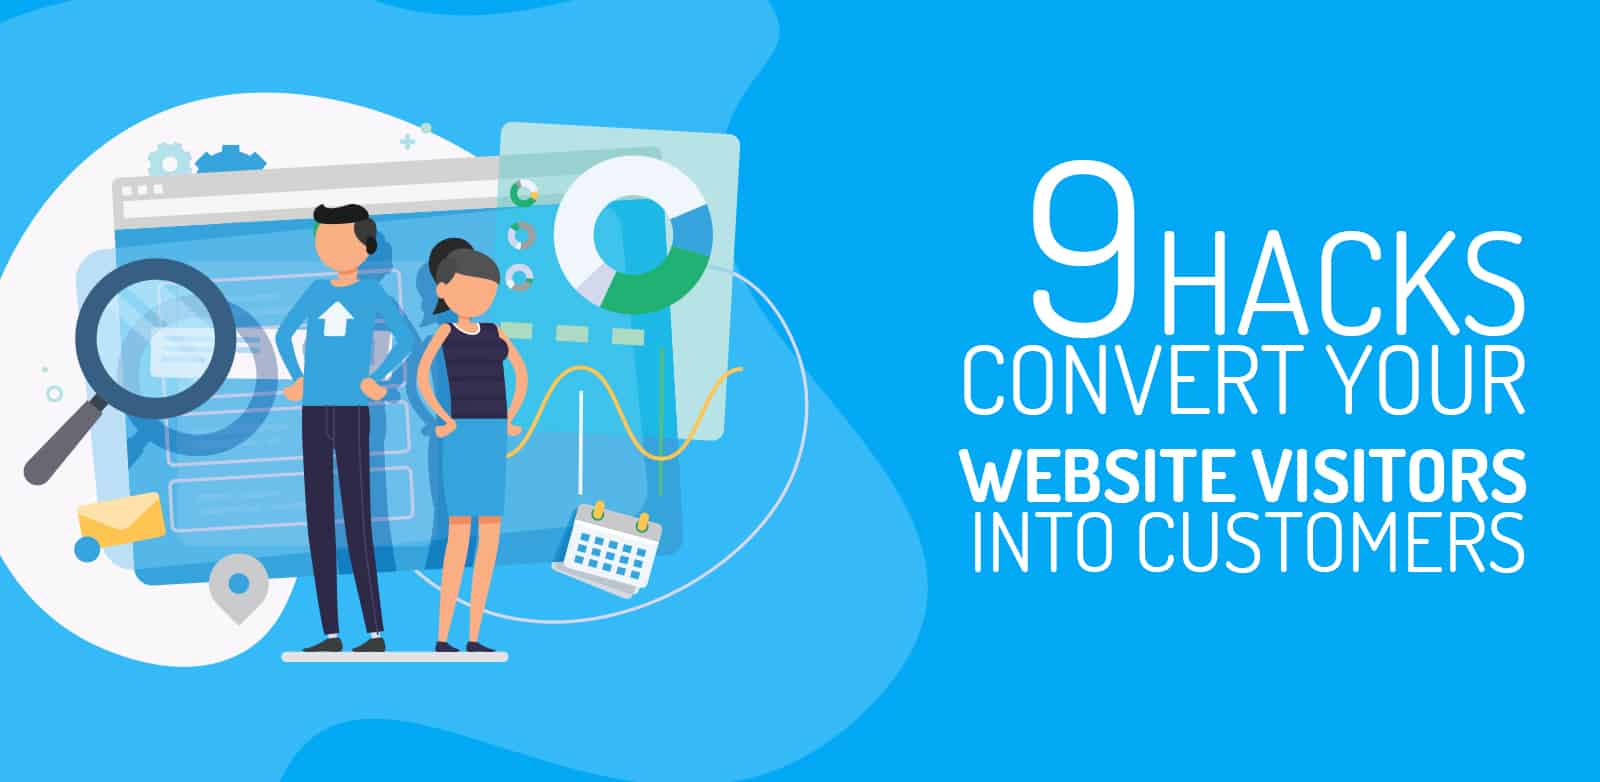 Convert Your Website Visitors Into Customers